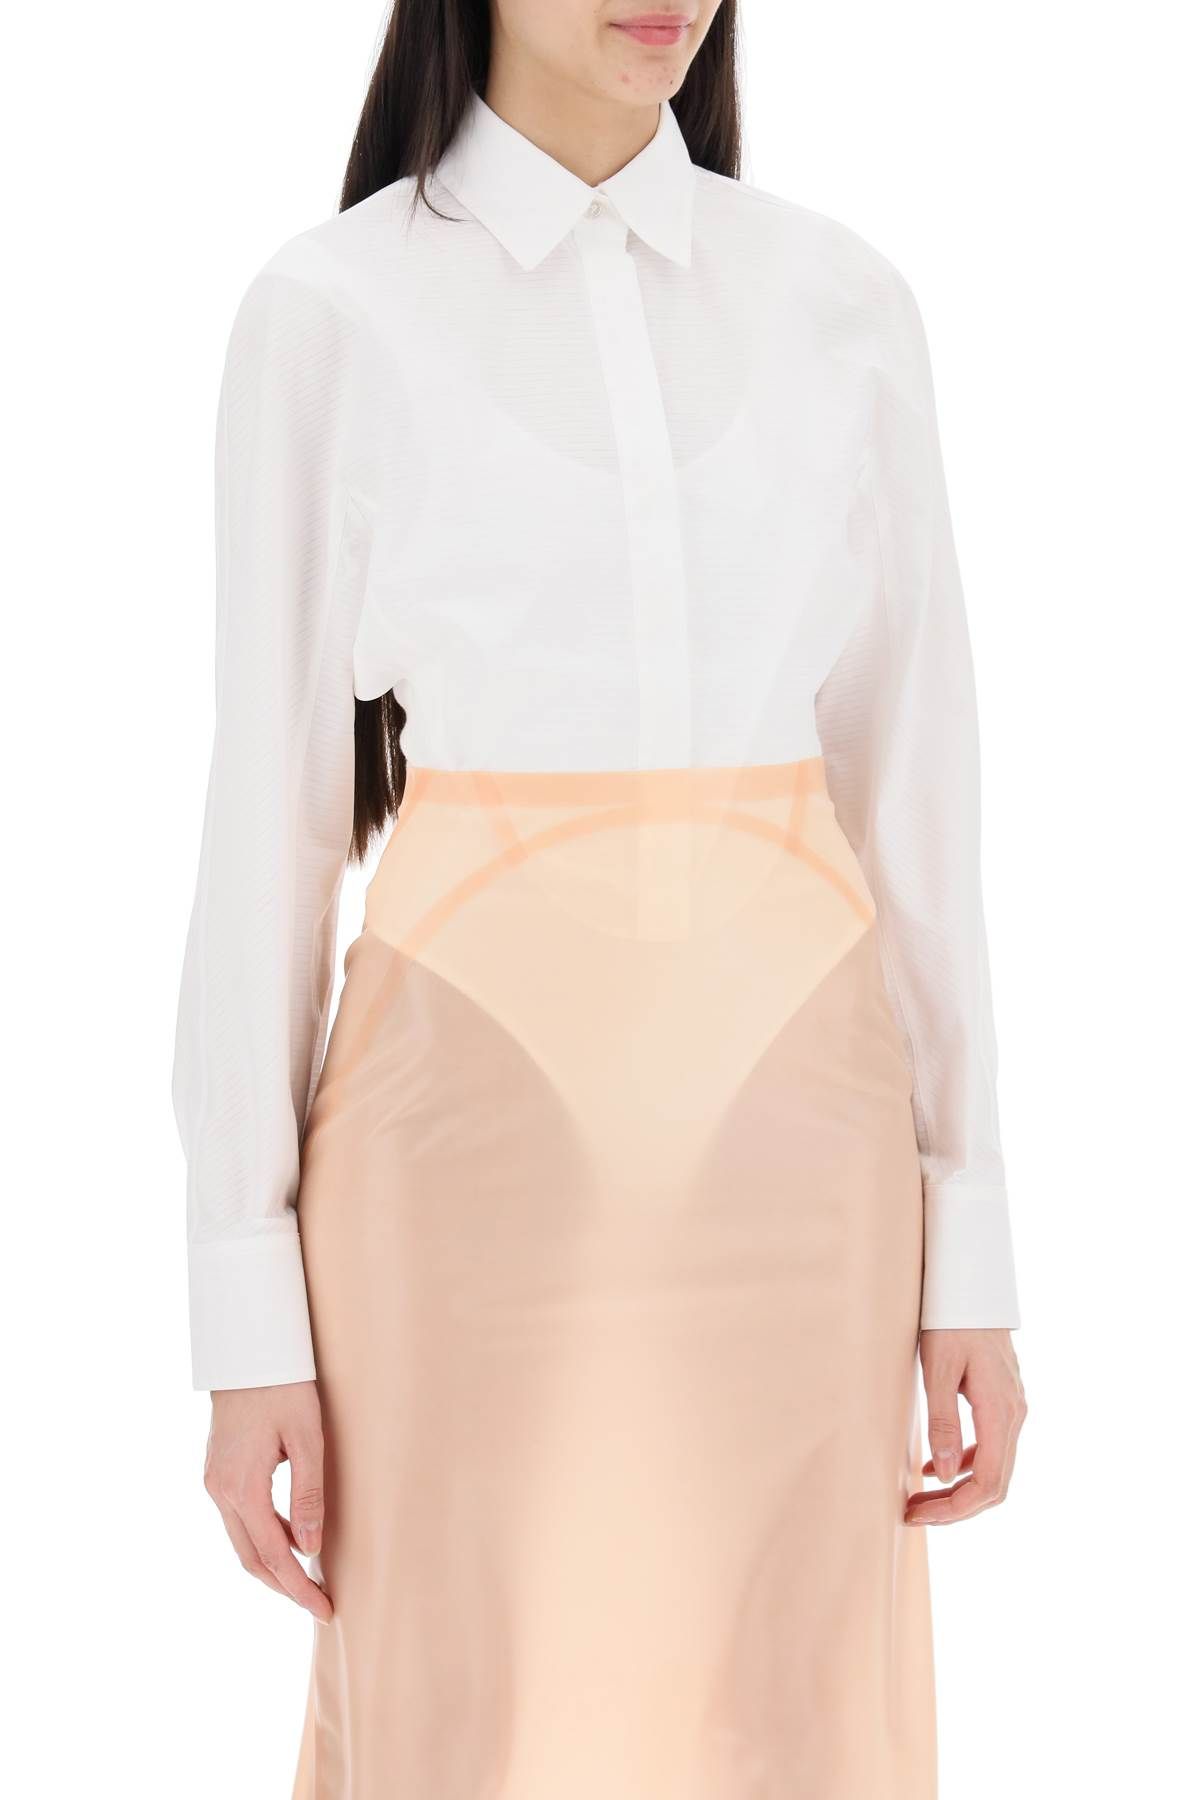 Shop Alaïa Layered Shirt Body For In White